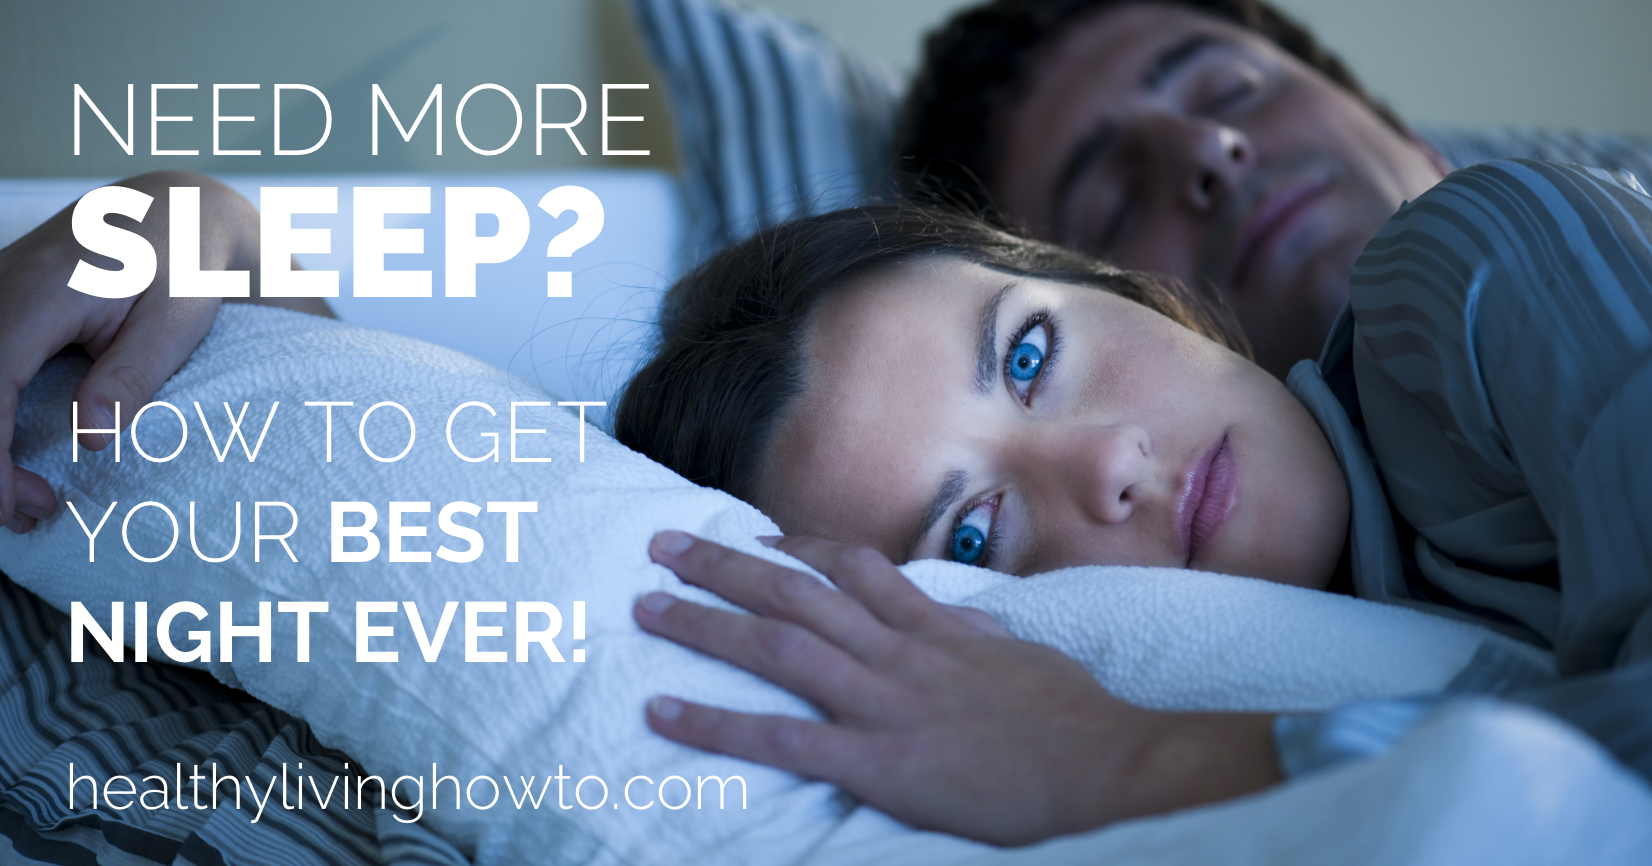 Need More Sleep? How To Get Your Best Night Ever! | healthylivinghowto.com featured